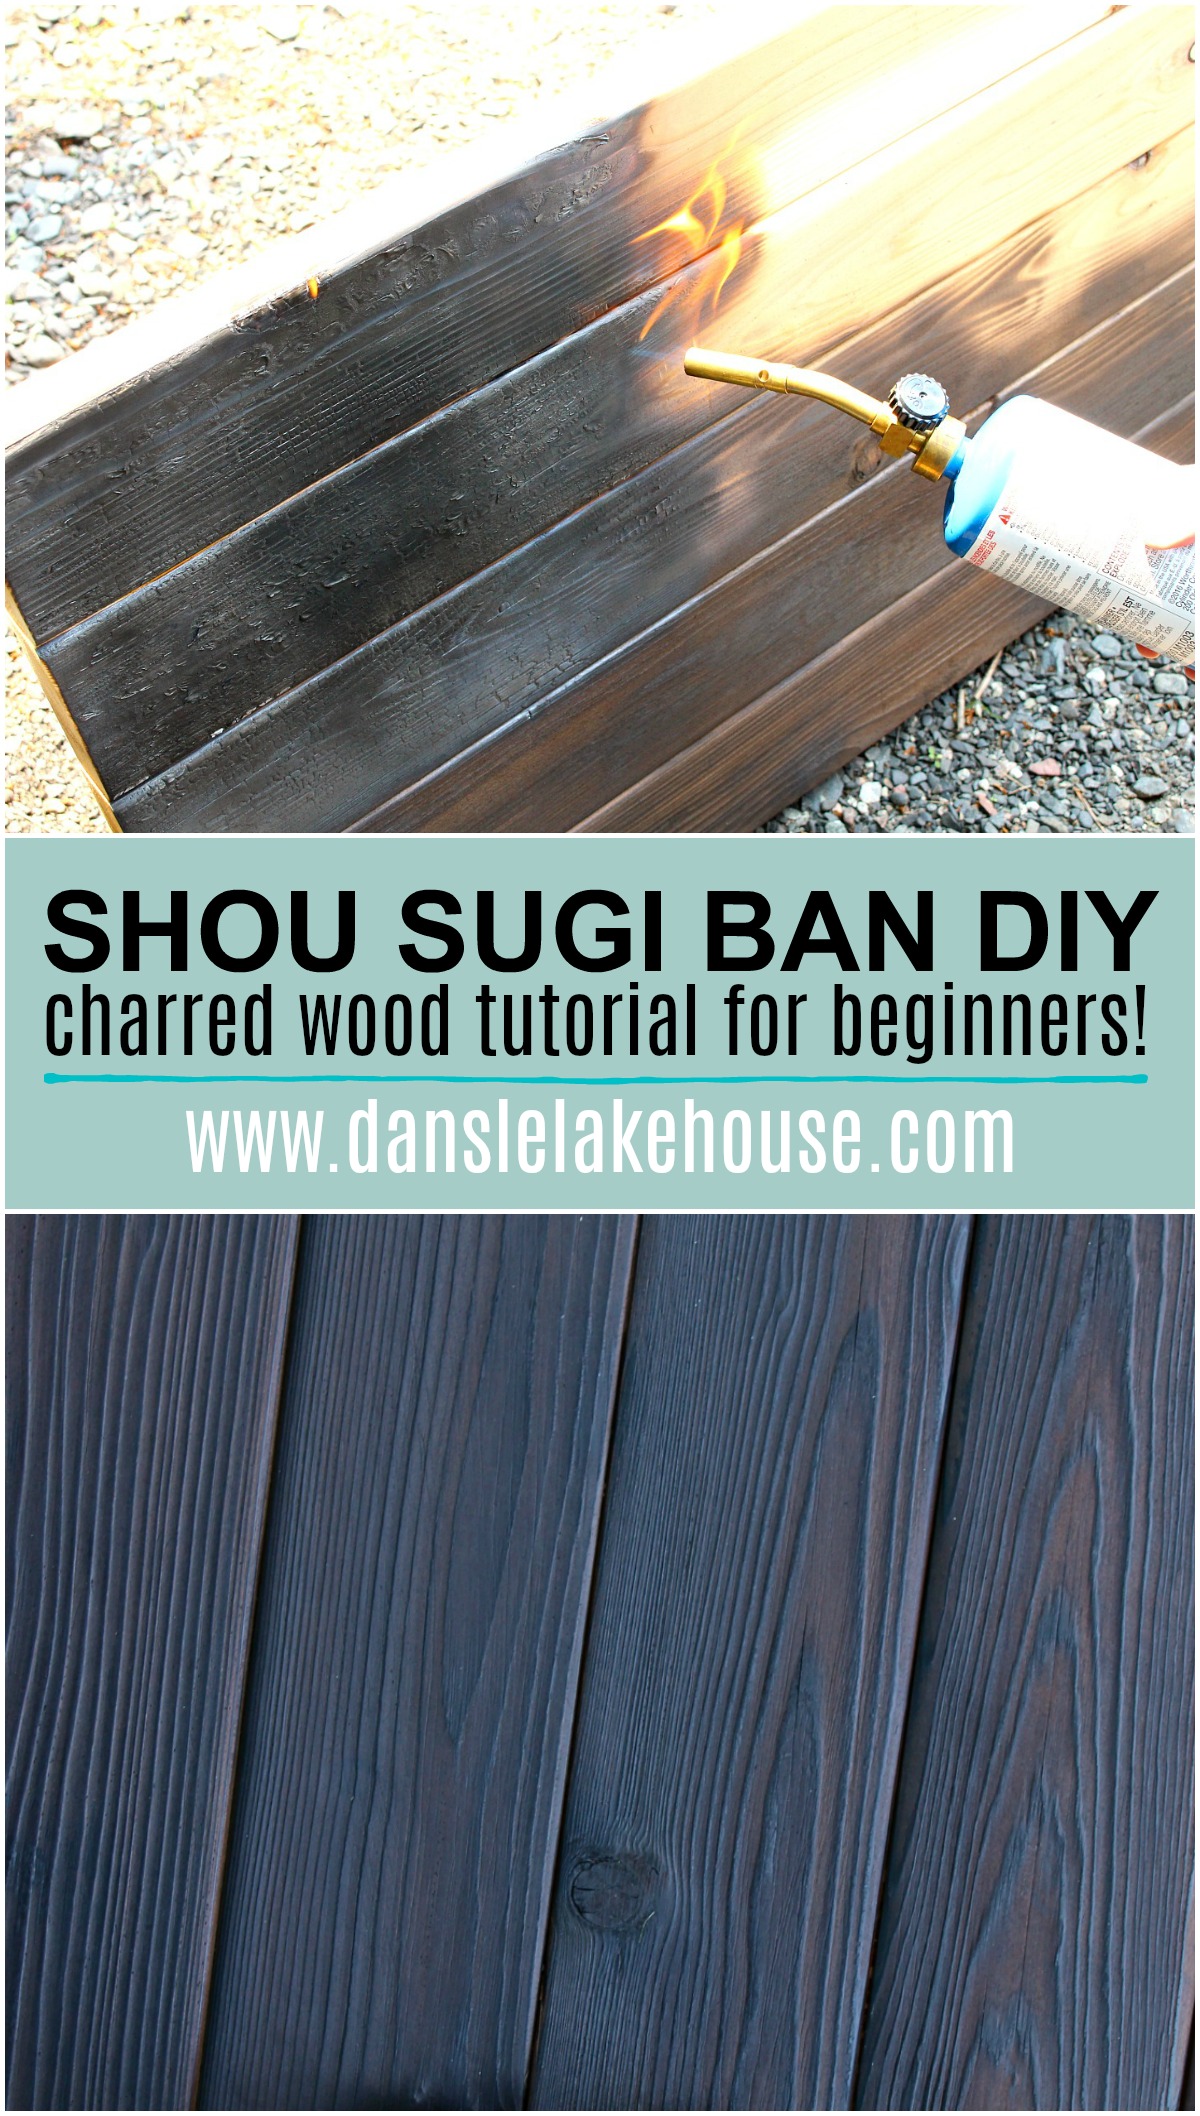 Cricut Tutorial: How to Do Wood Burning and make your own Wood